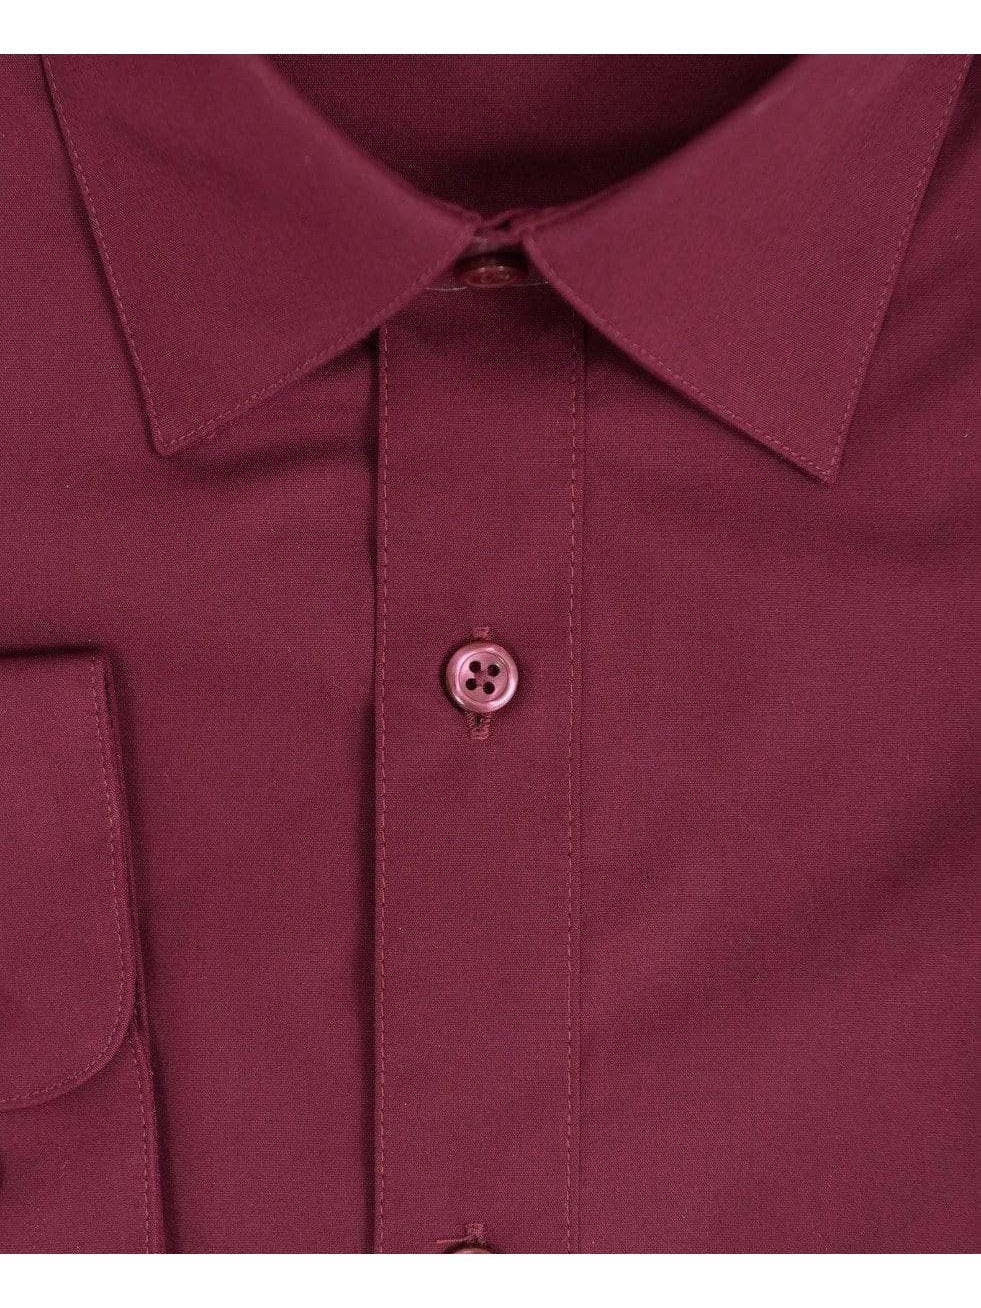 Marquis SHIRTS Marquis Classic Fit Solid Burgundy Wrinkle Resistant Cotton Blend Dress Shirt